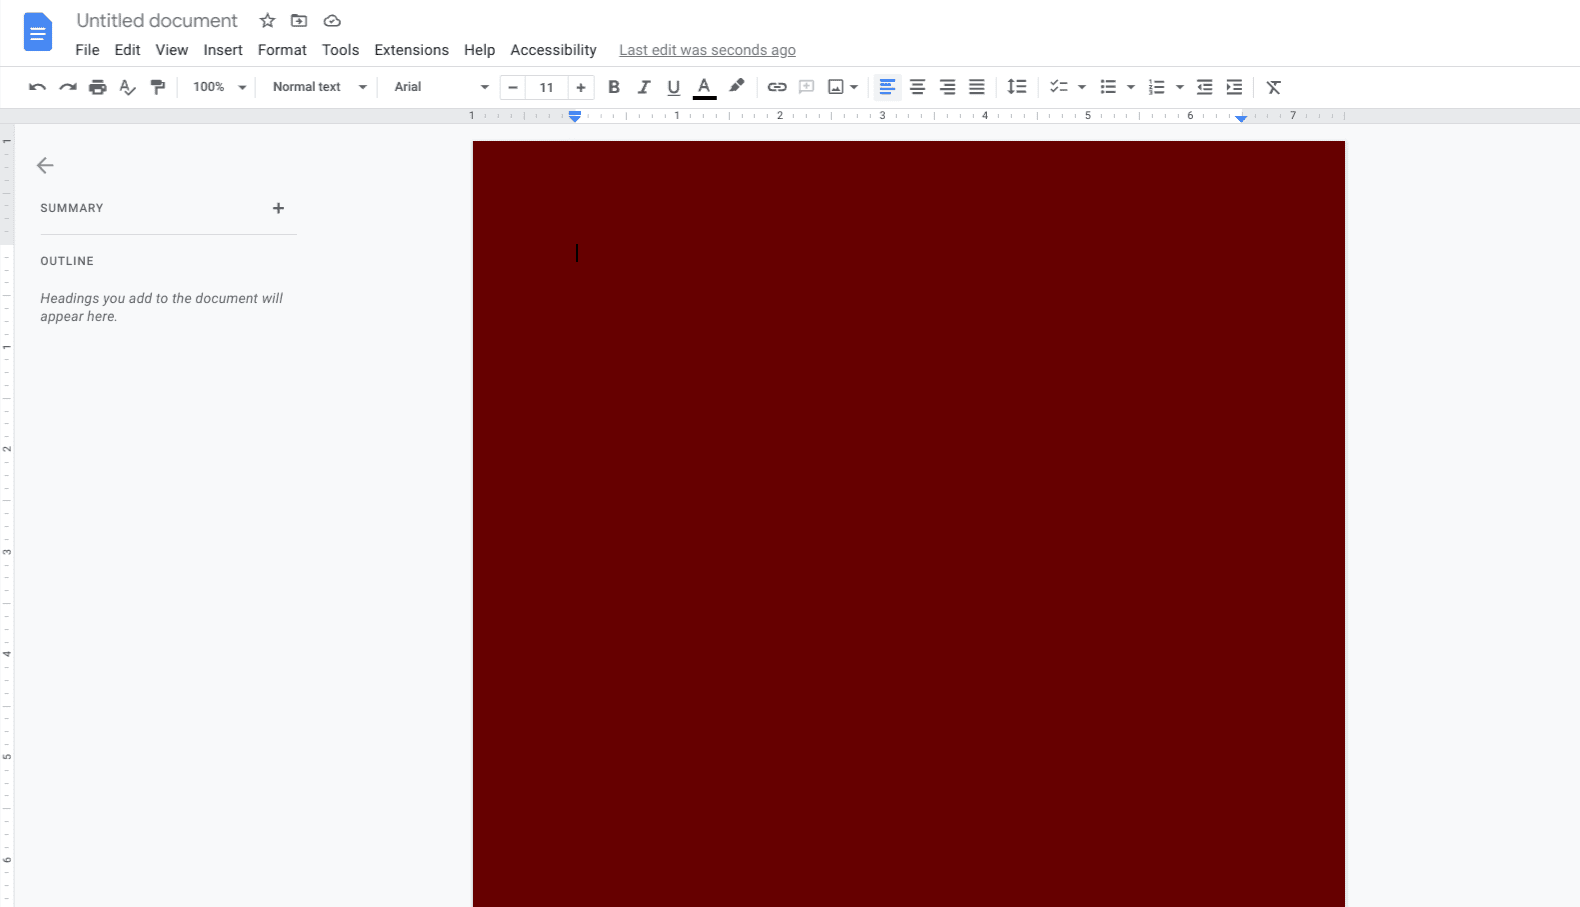 Google Docs page's color switched